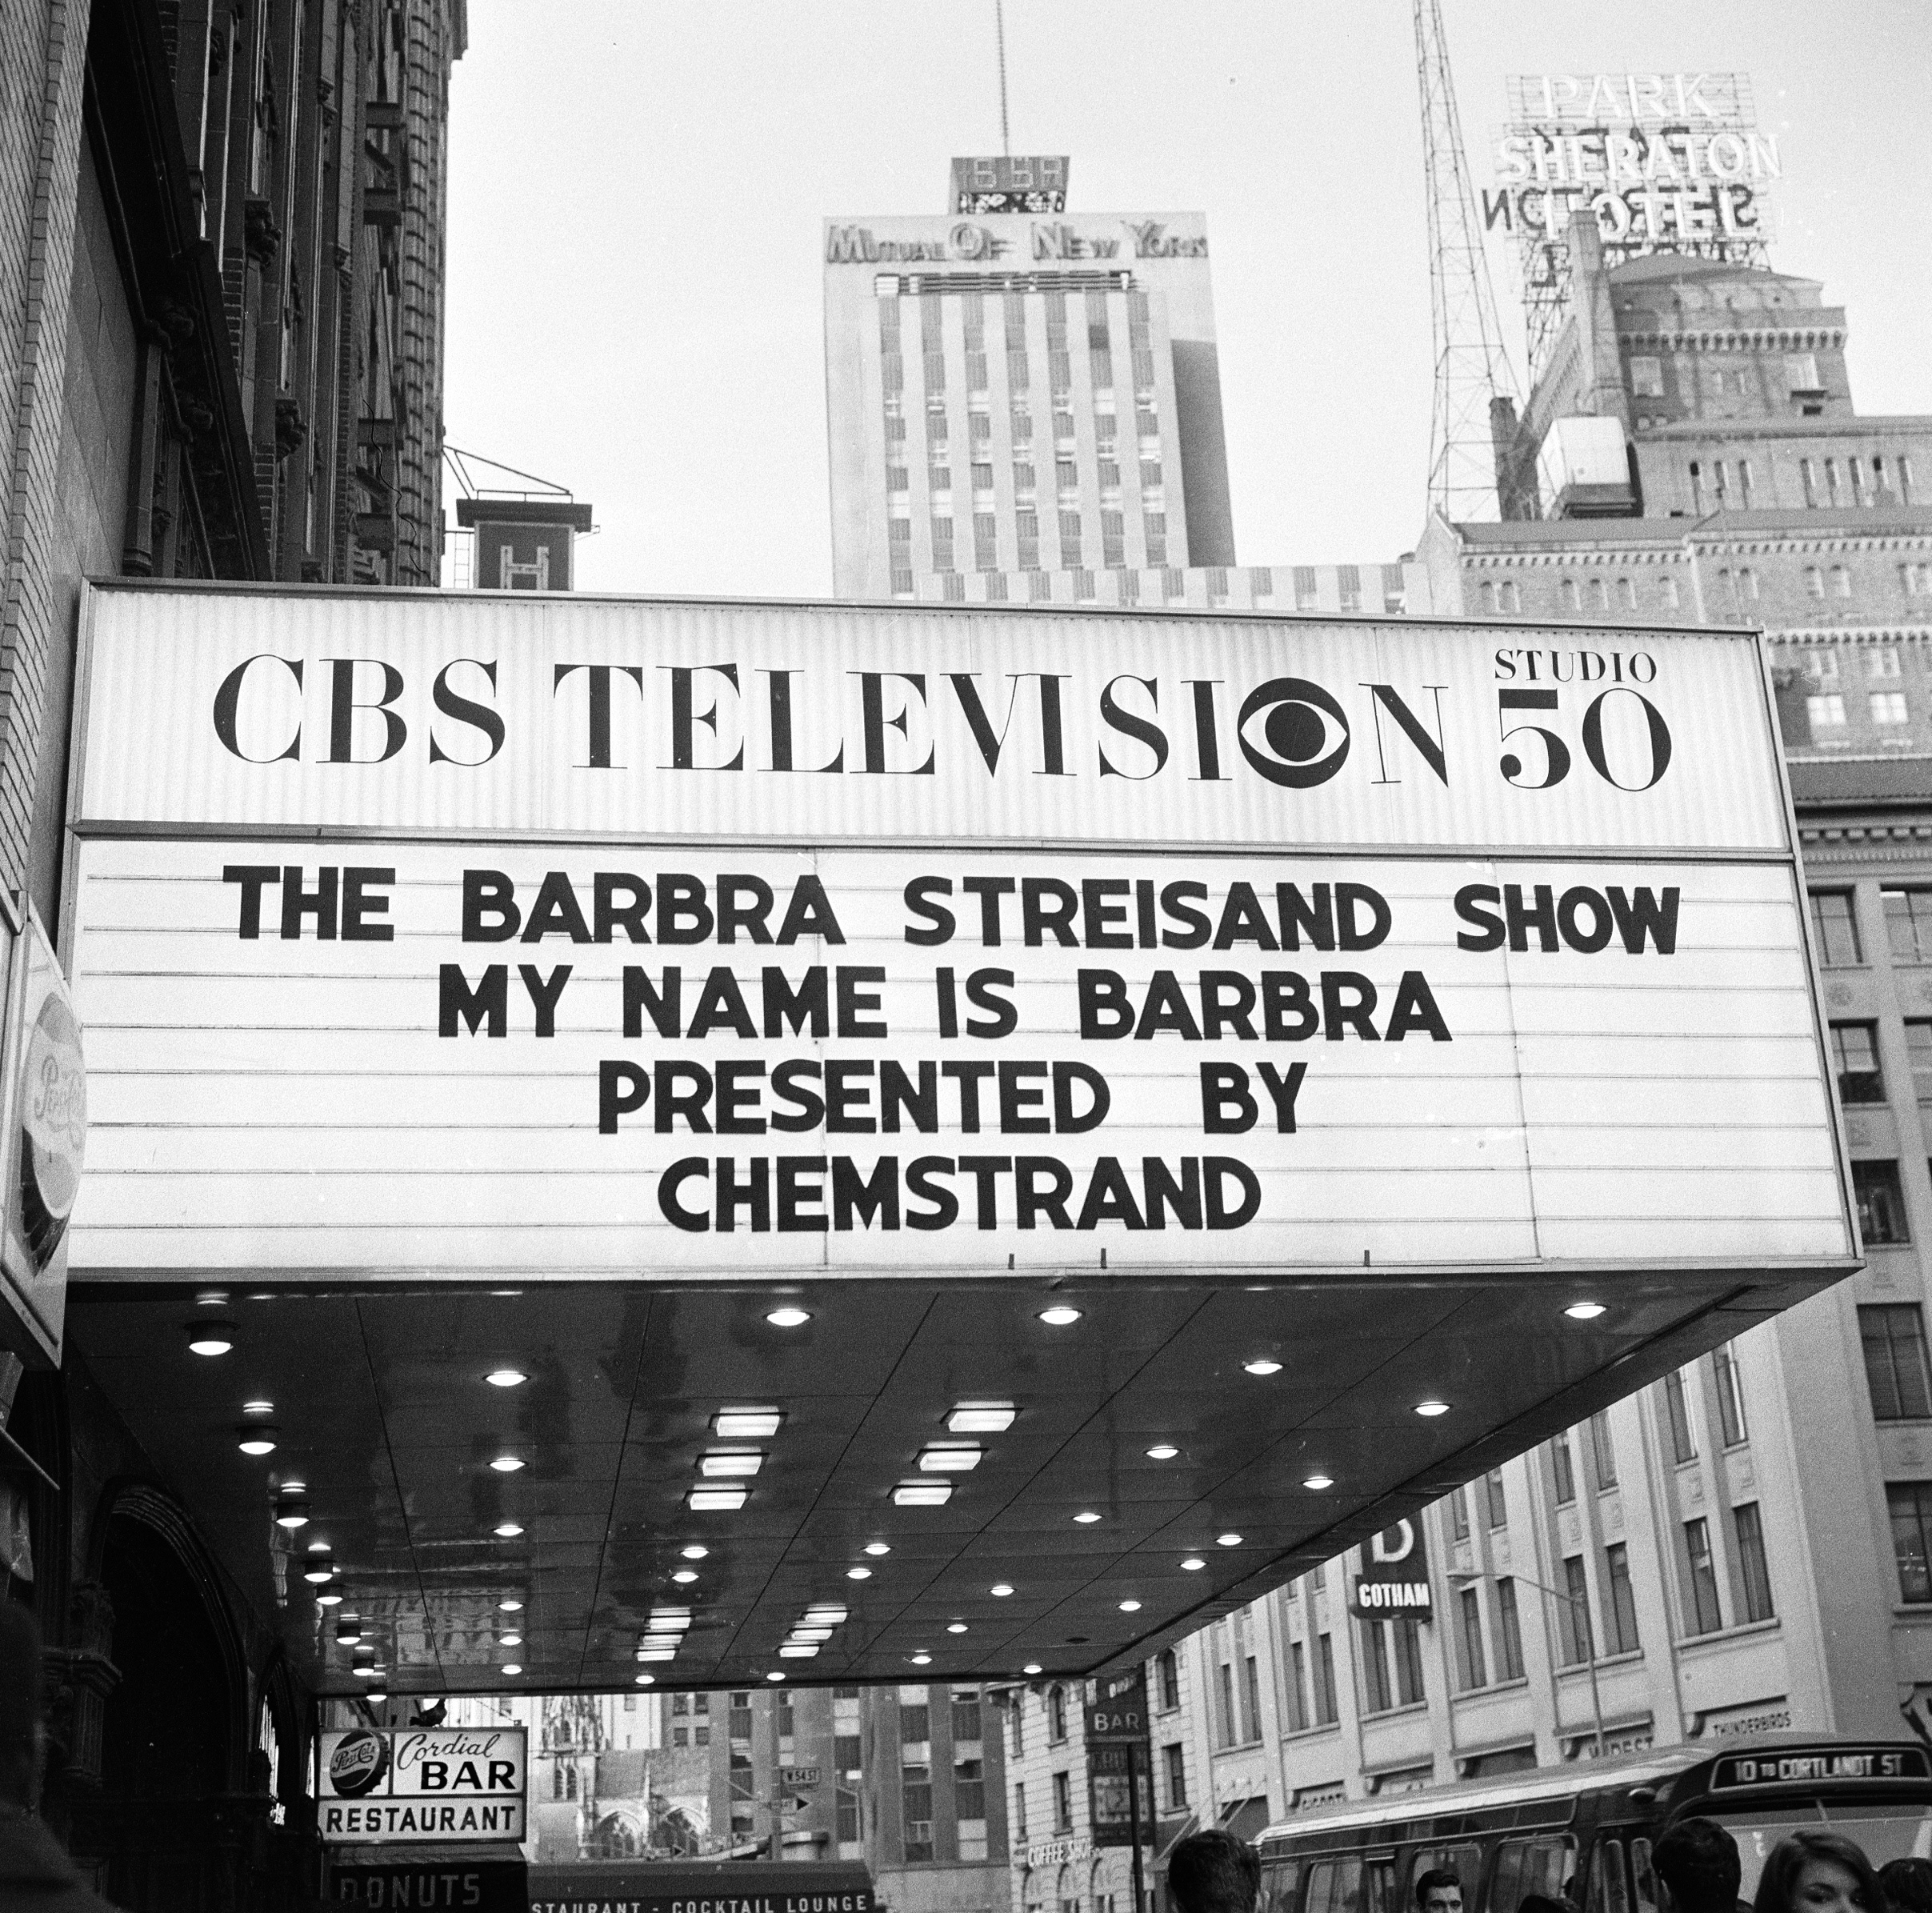 NEW YORK - APRIL 12: MY NAME IS BARBRA, the Barbra Streisand television special that aired on CBS, April 28, 1965. The marquee at CBS Television Studio 50. Image dated April 14, 1965. (Photo Credit: CBS via Getty Images)